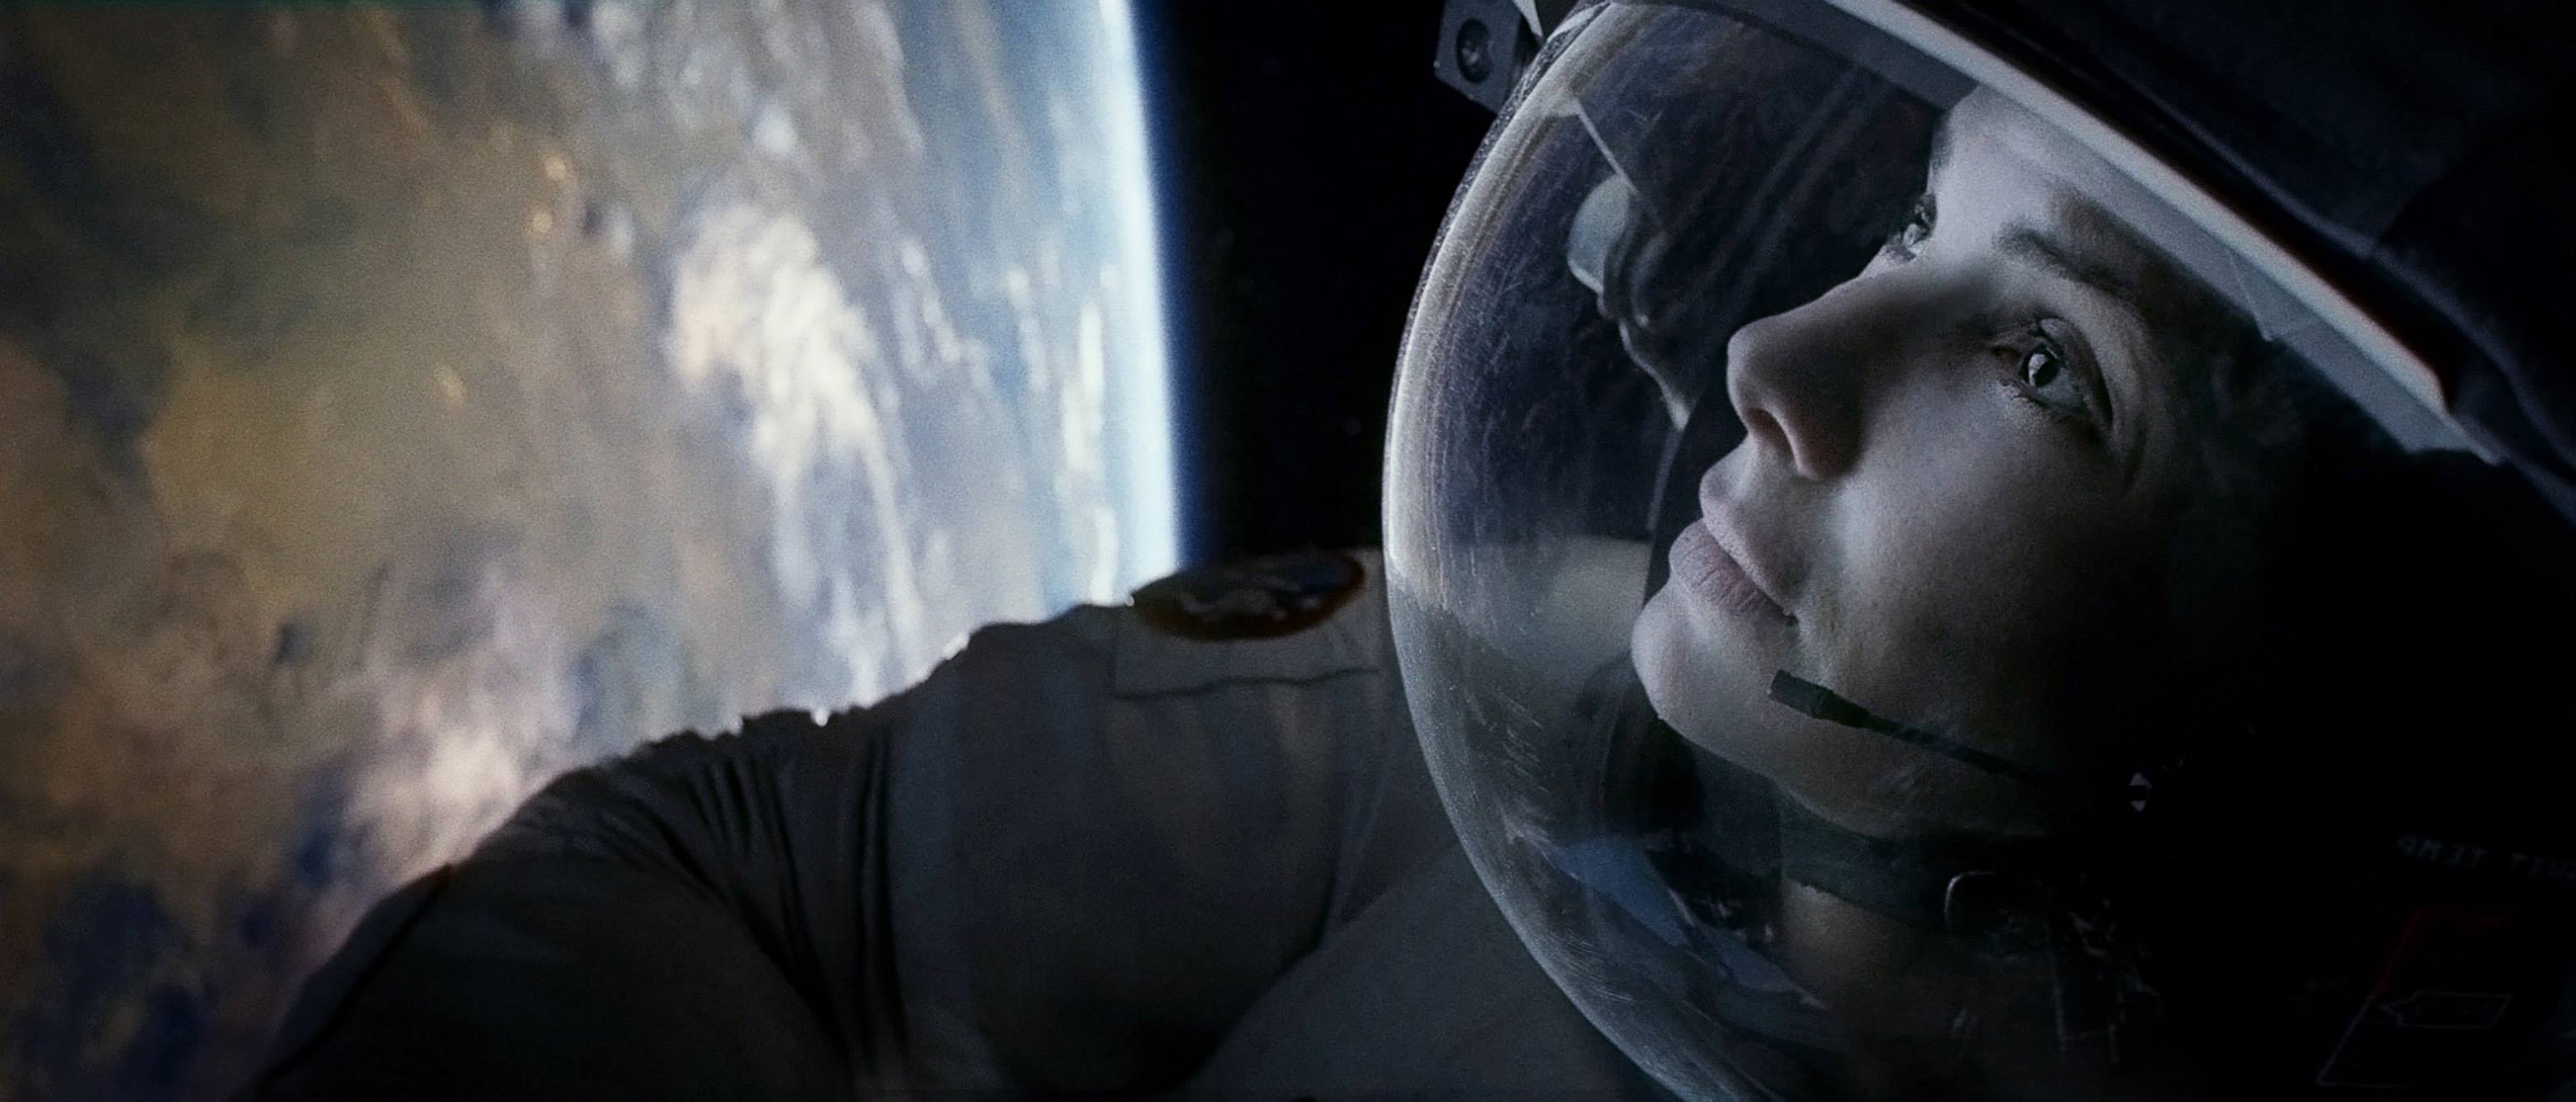 Gravity HD Wallpaper and Background Image